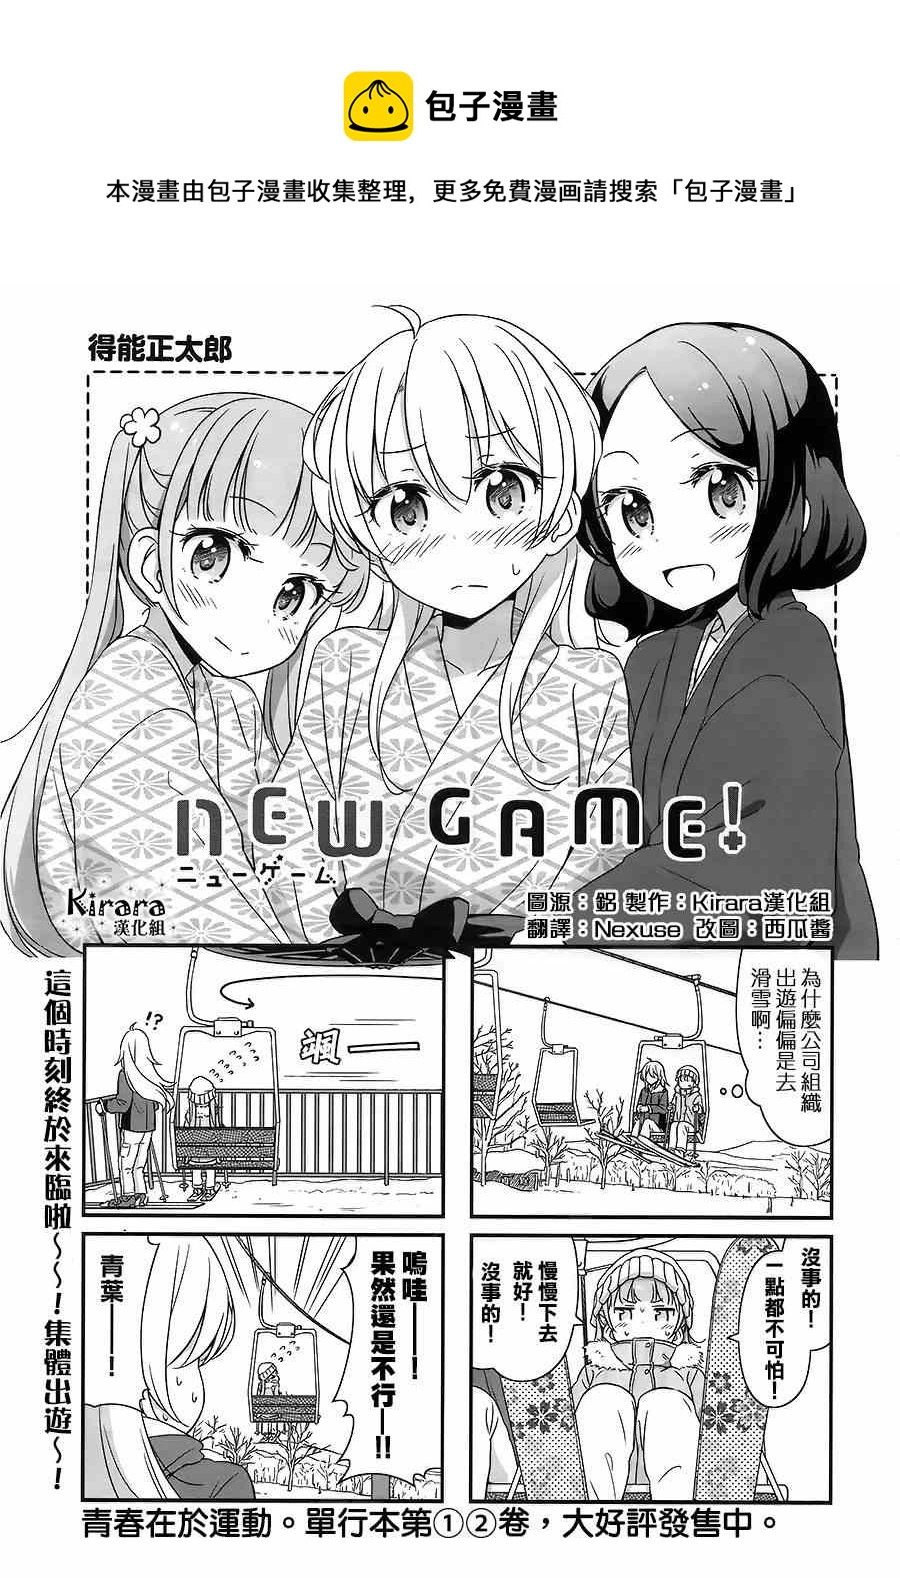 NEW GAME! - 28 第28話 - 1